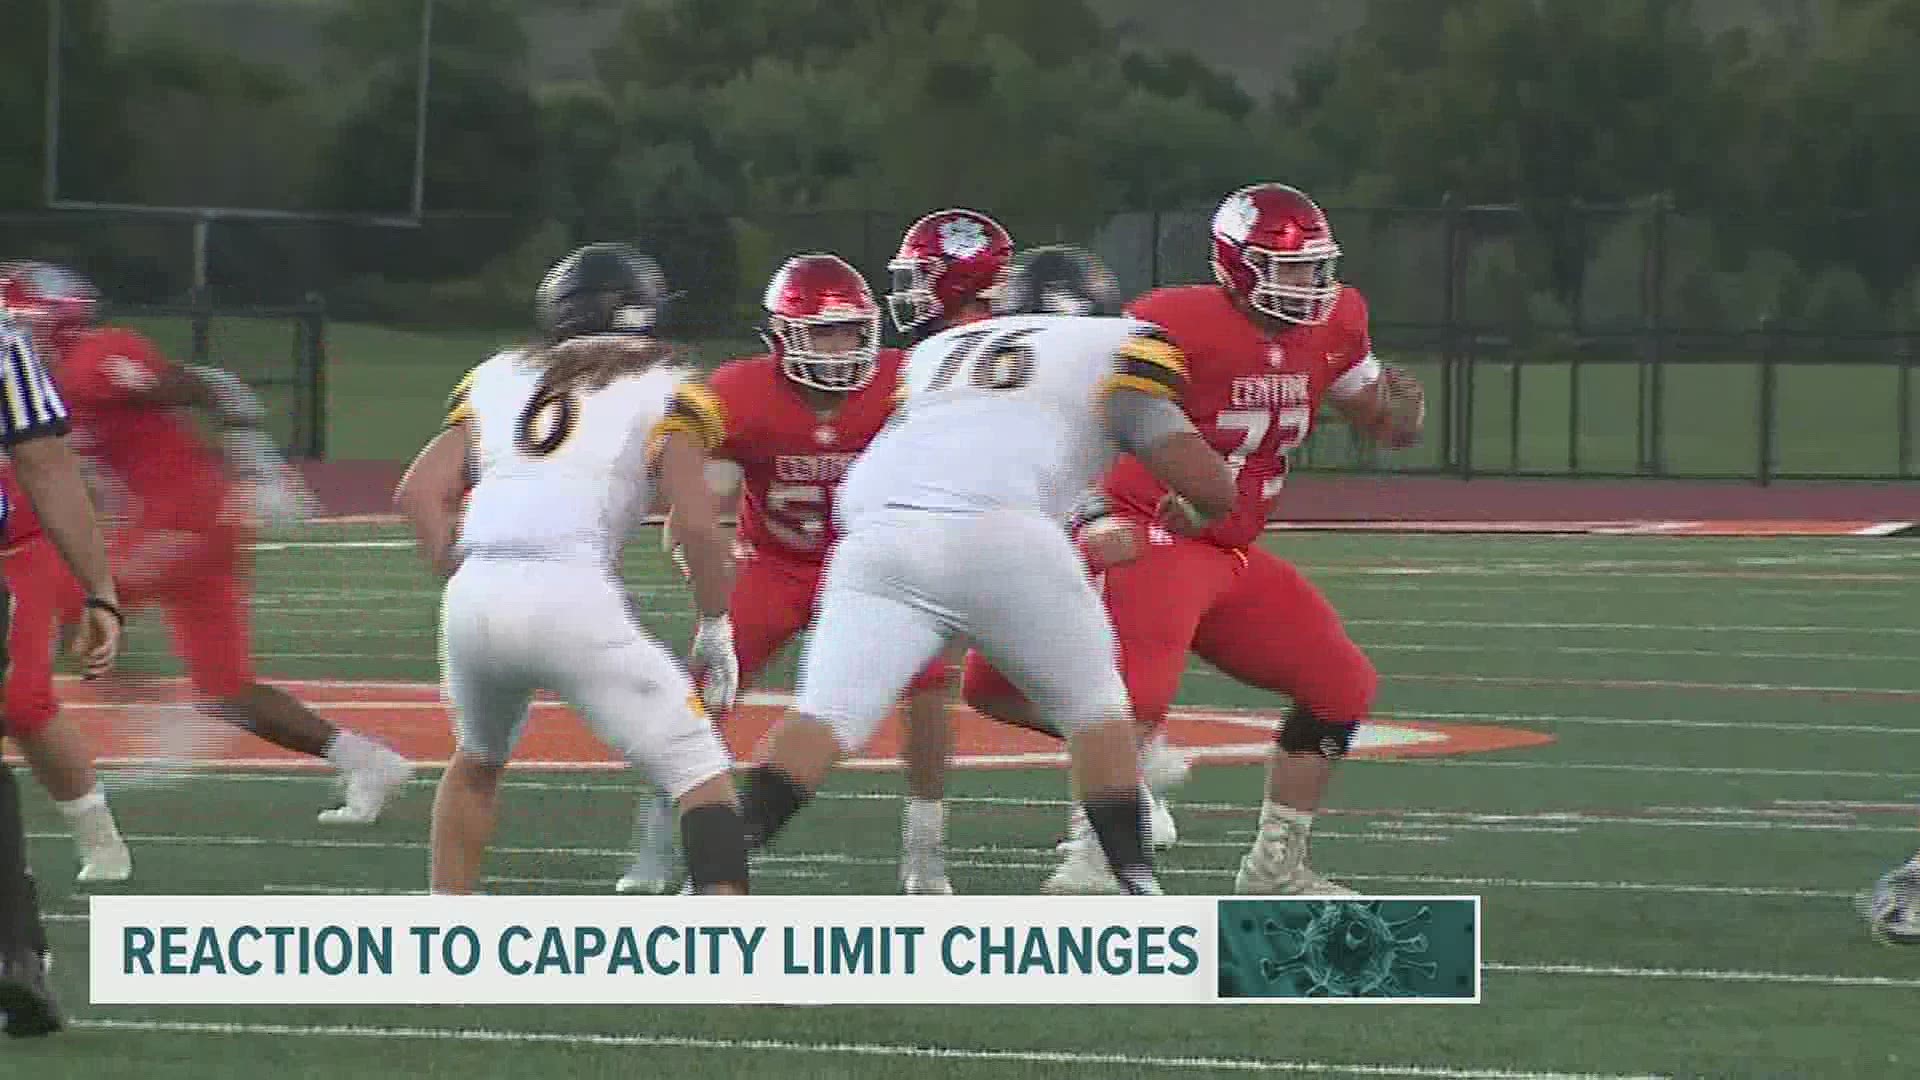 The Pa. Department of Health has released new guidelines for 'safe gathering limits' across the Commonwealth. How will that affect spectators of high school sports?